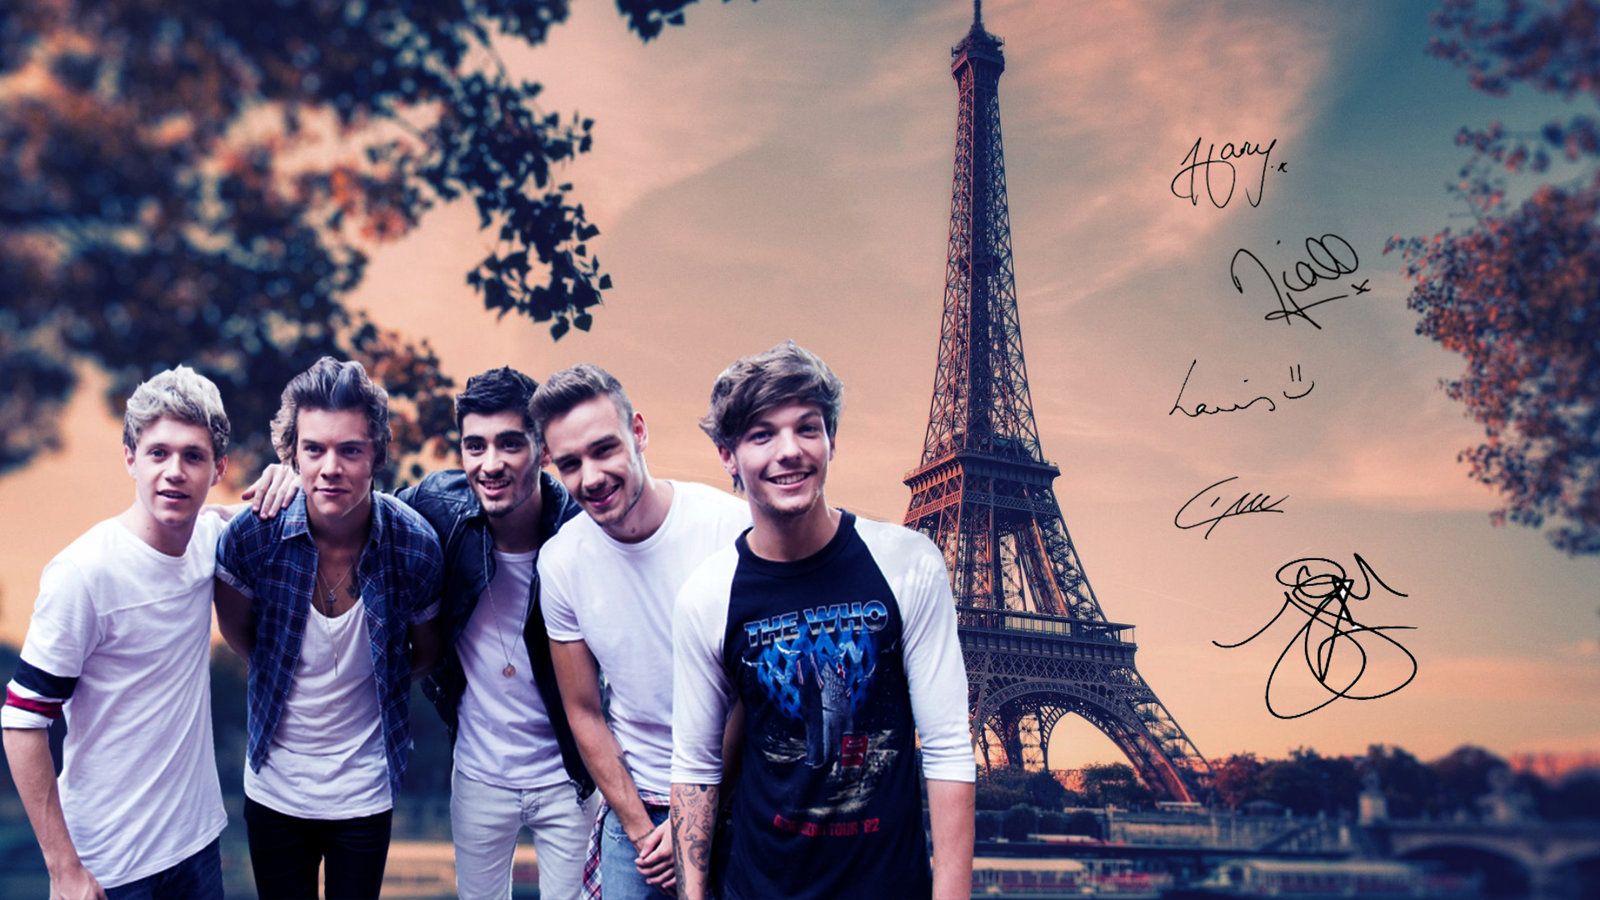 one direction wallpaper